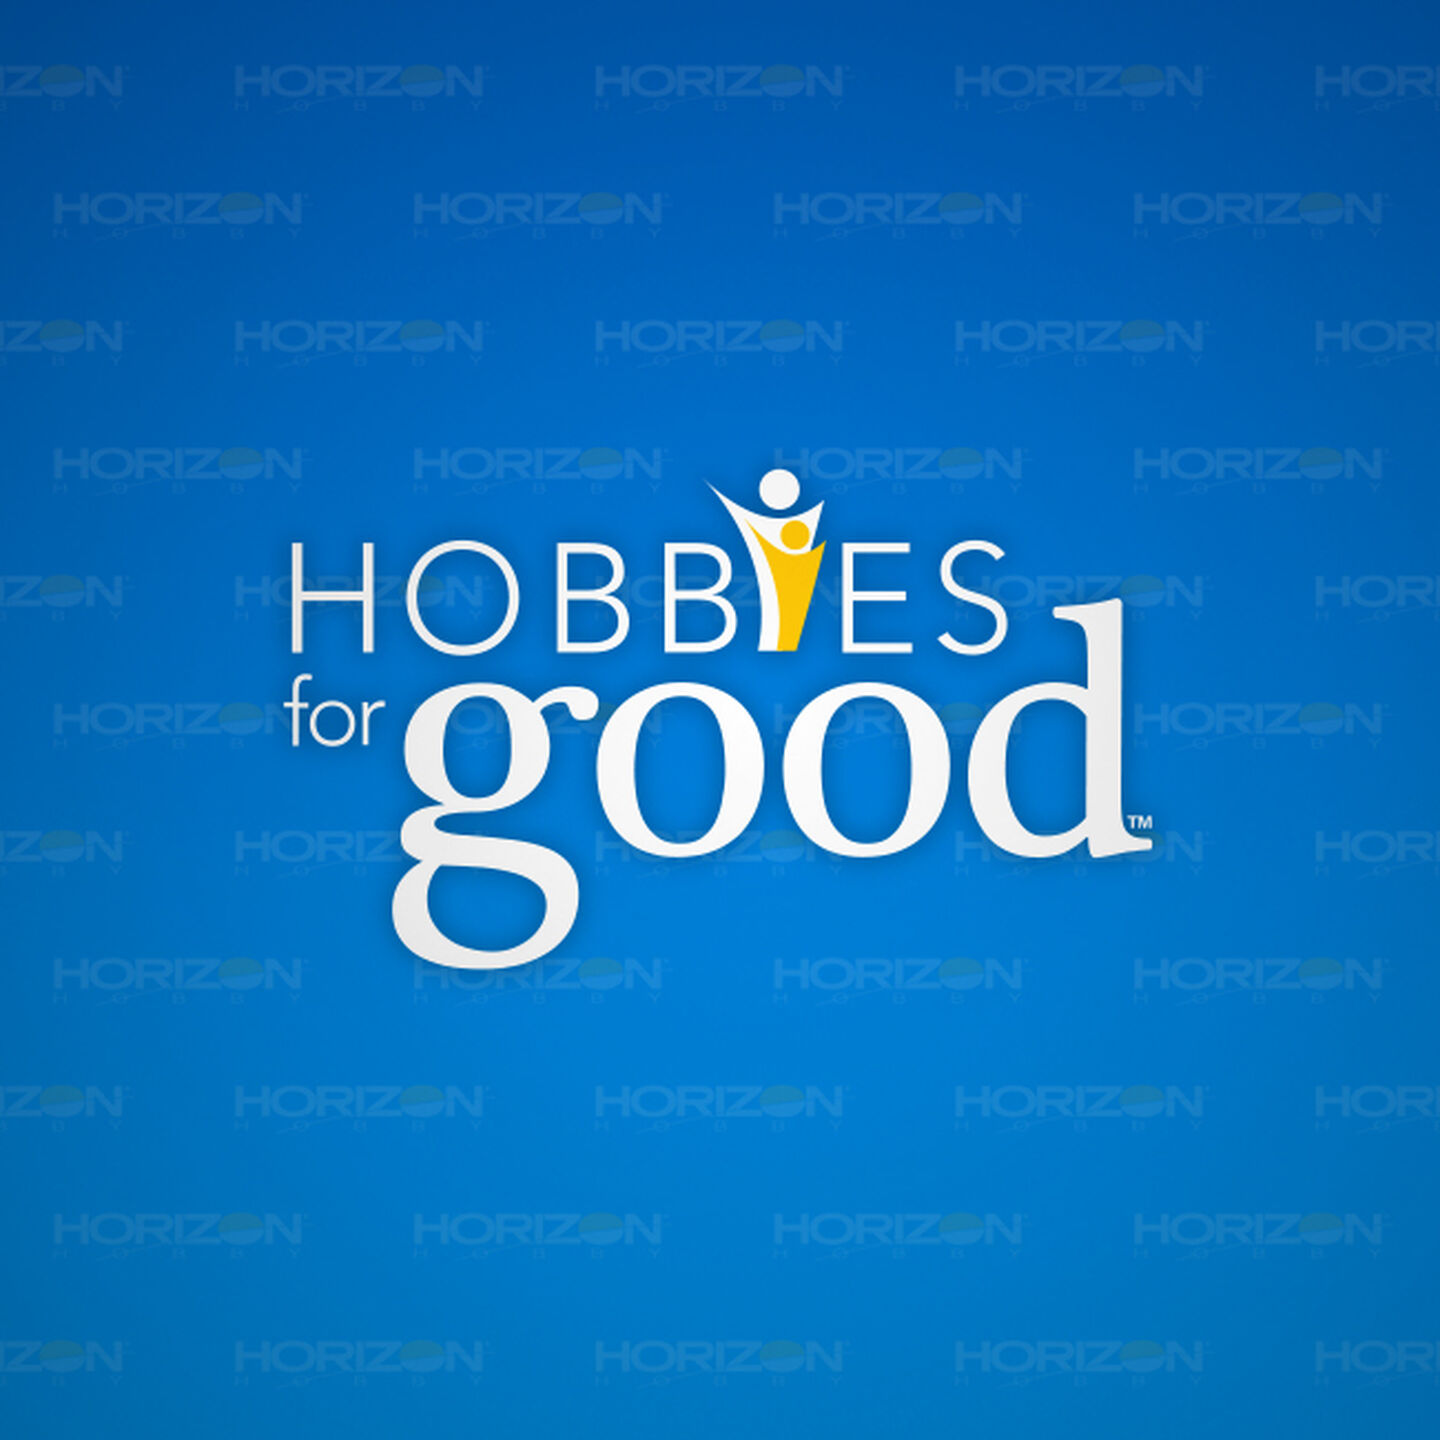 Hobbies for Good helps the community through organizations big and small.